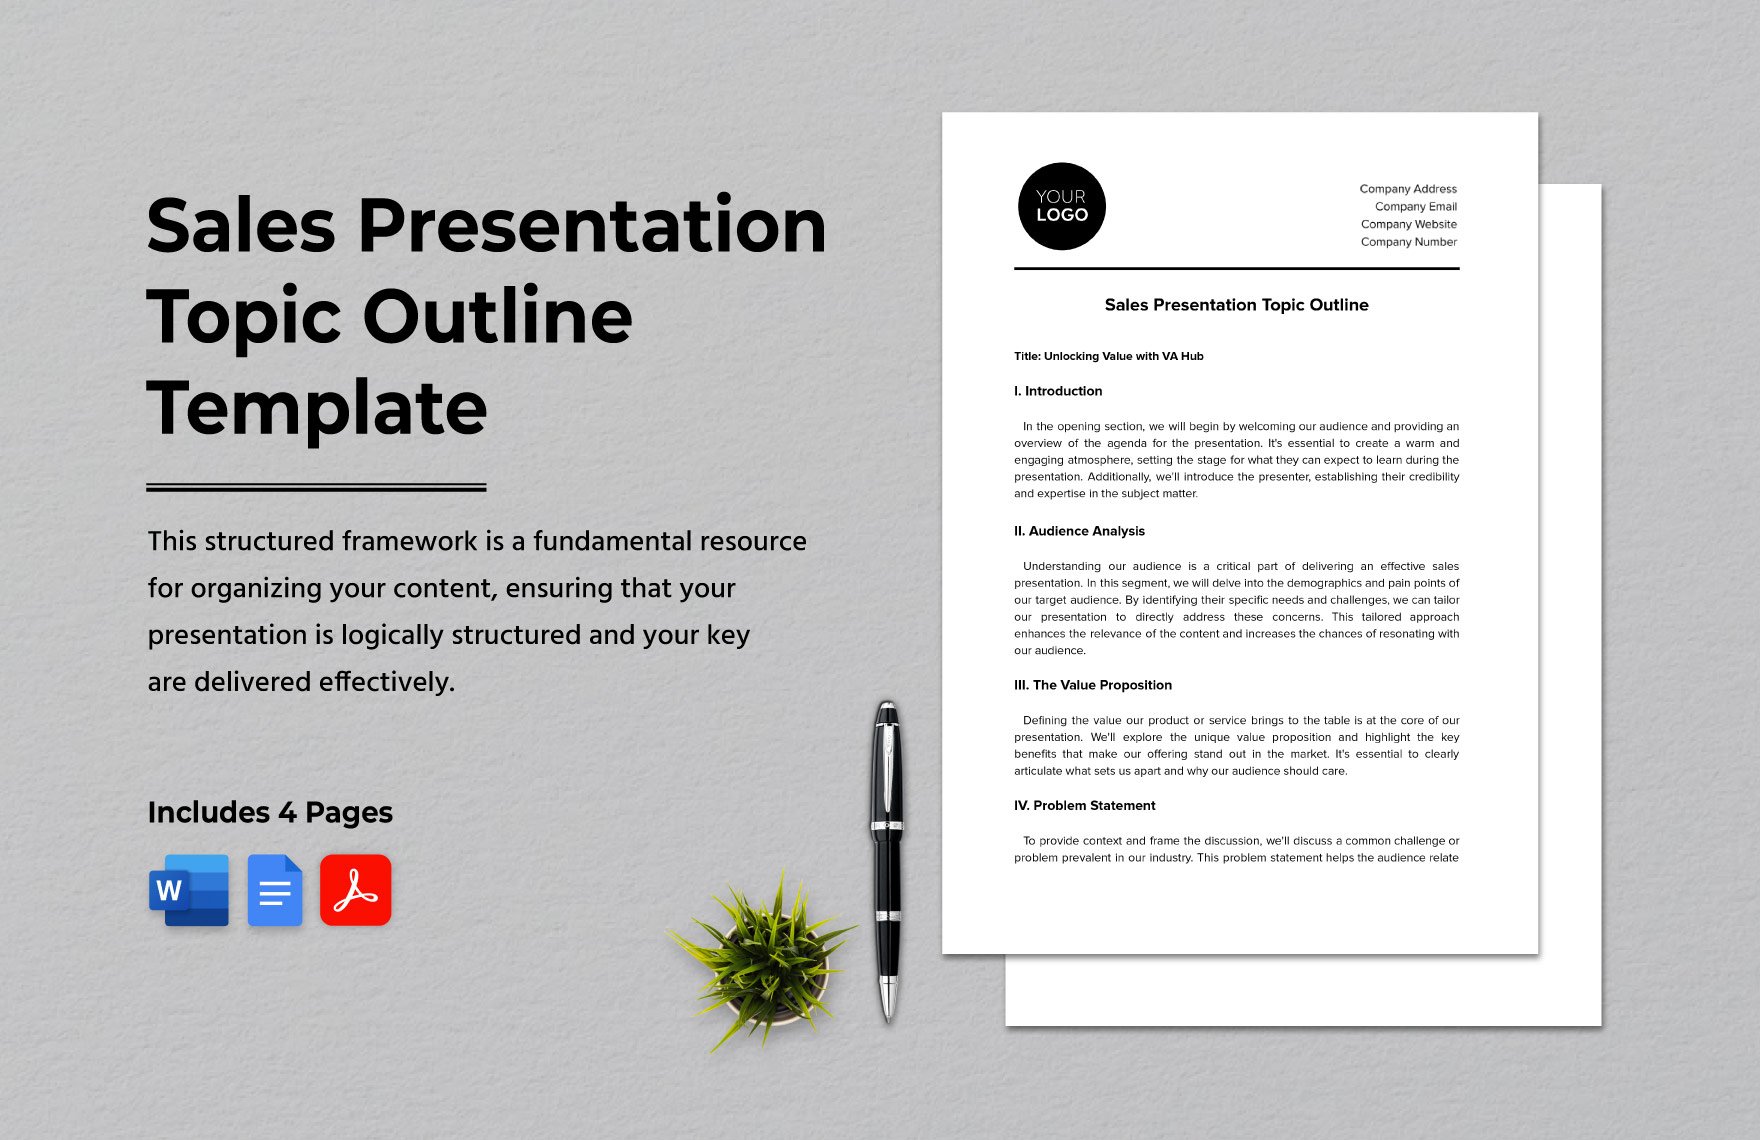 Sales Presentation Topic Outline Template